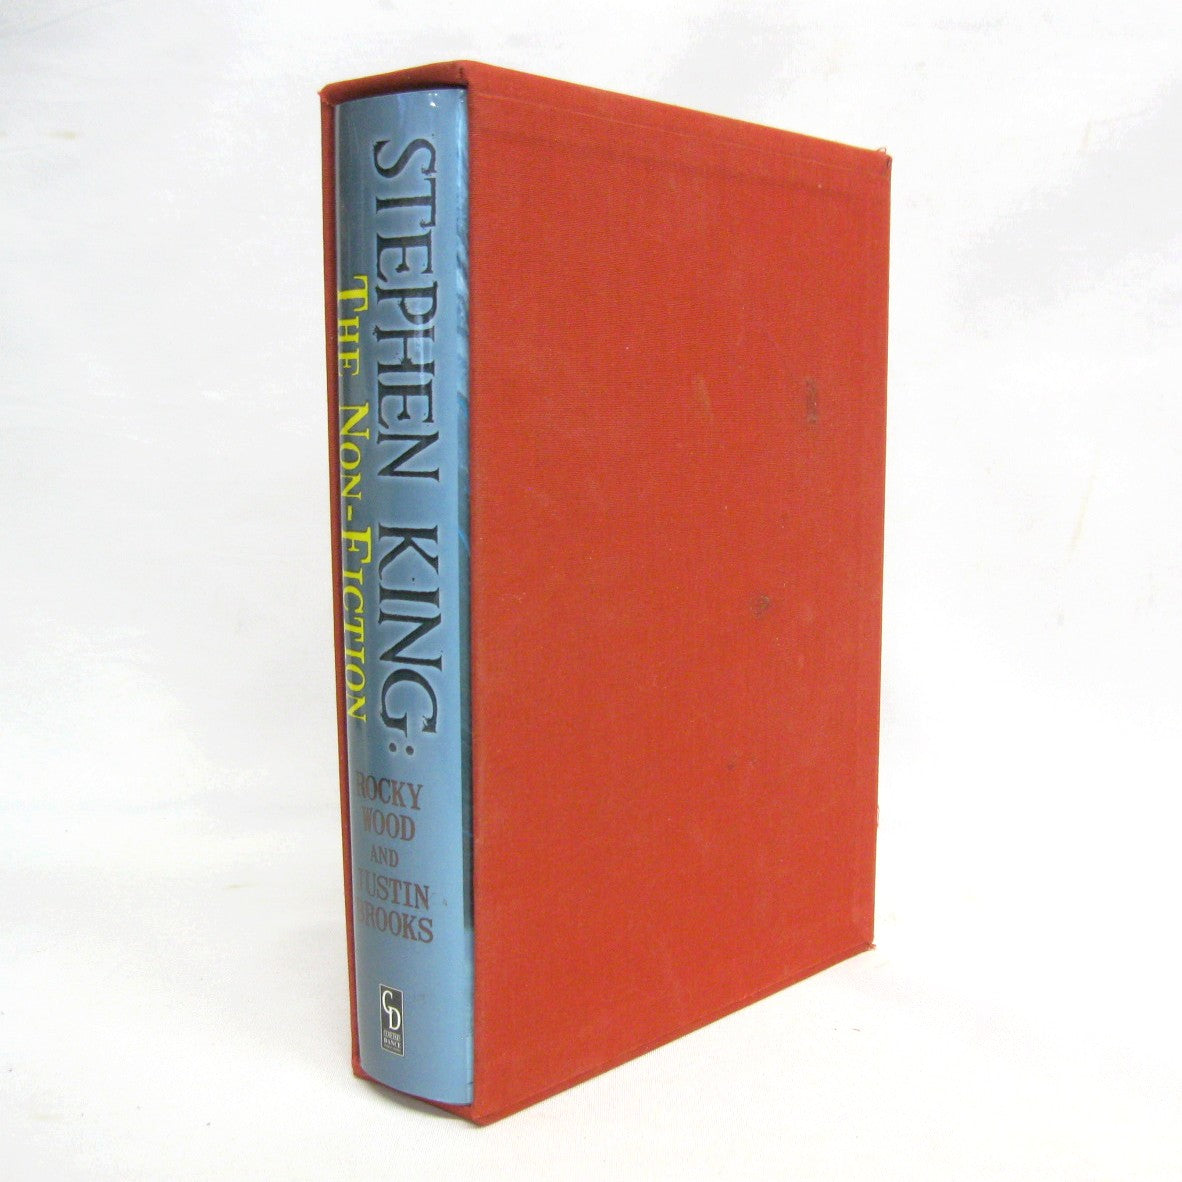 Stephen King: The Non-Fiction by Rocky Woods and Justin Brooks